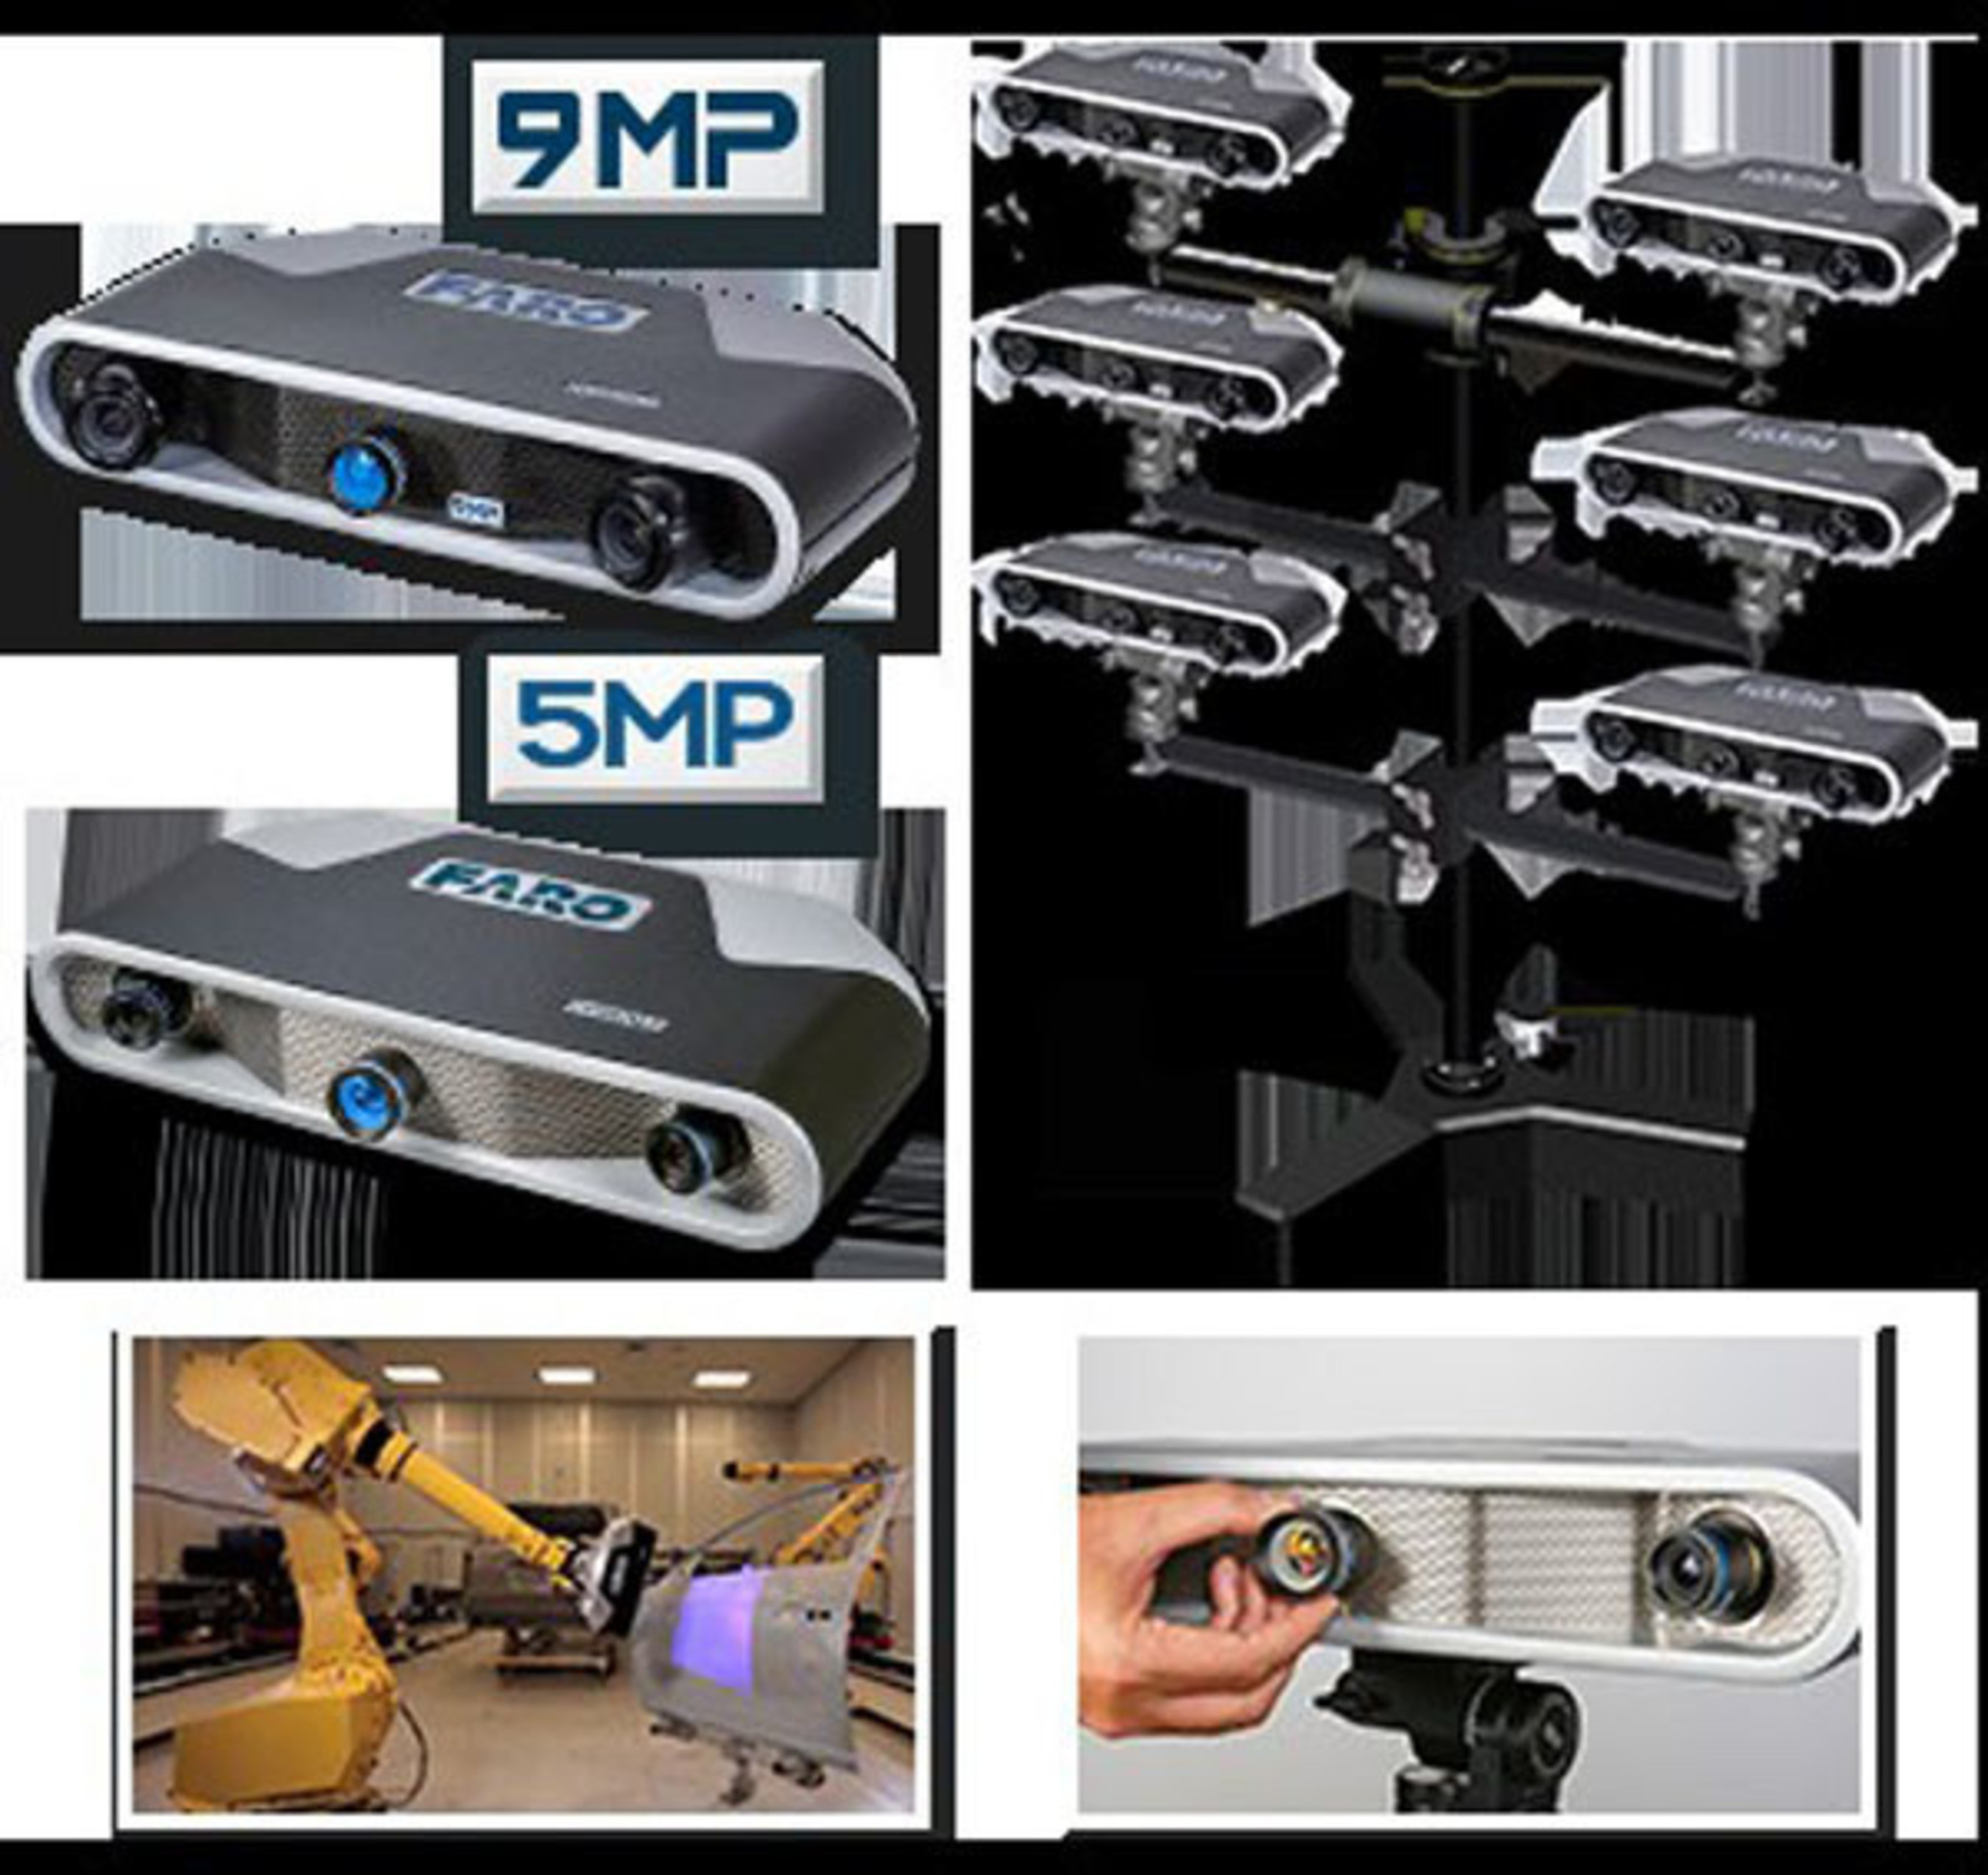 9MP Cobalt Array Imager and 5MP Cobalt Array Imager. Six Cobalt sensors mounted in a multi-imager array configuration. Cobalt features interchangeable lenses and is easily mounted on a robot for automated inspections.